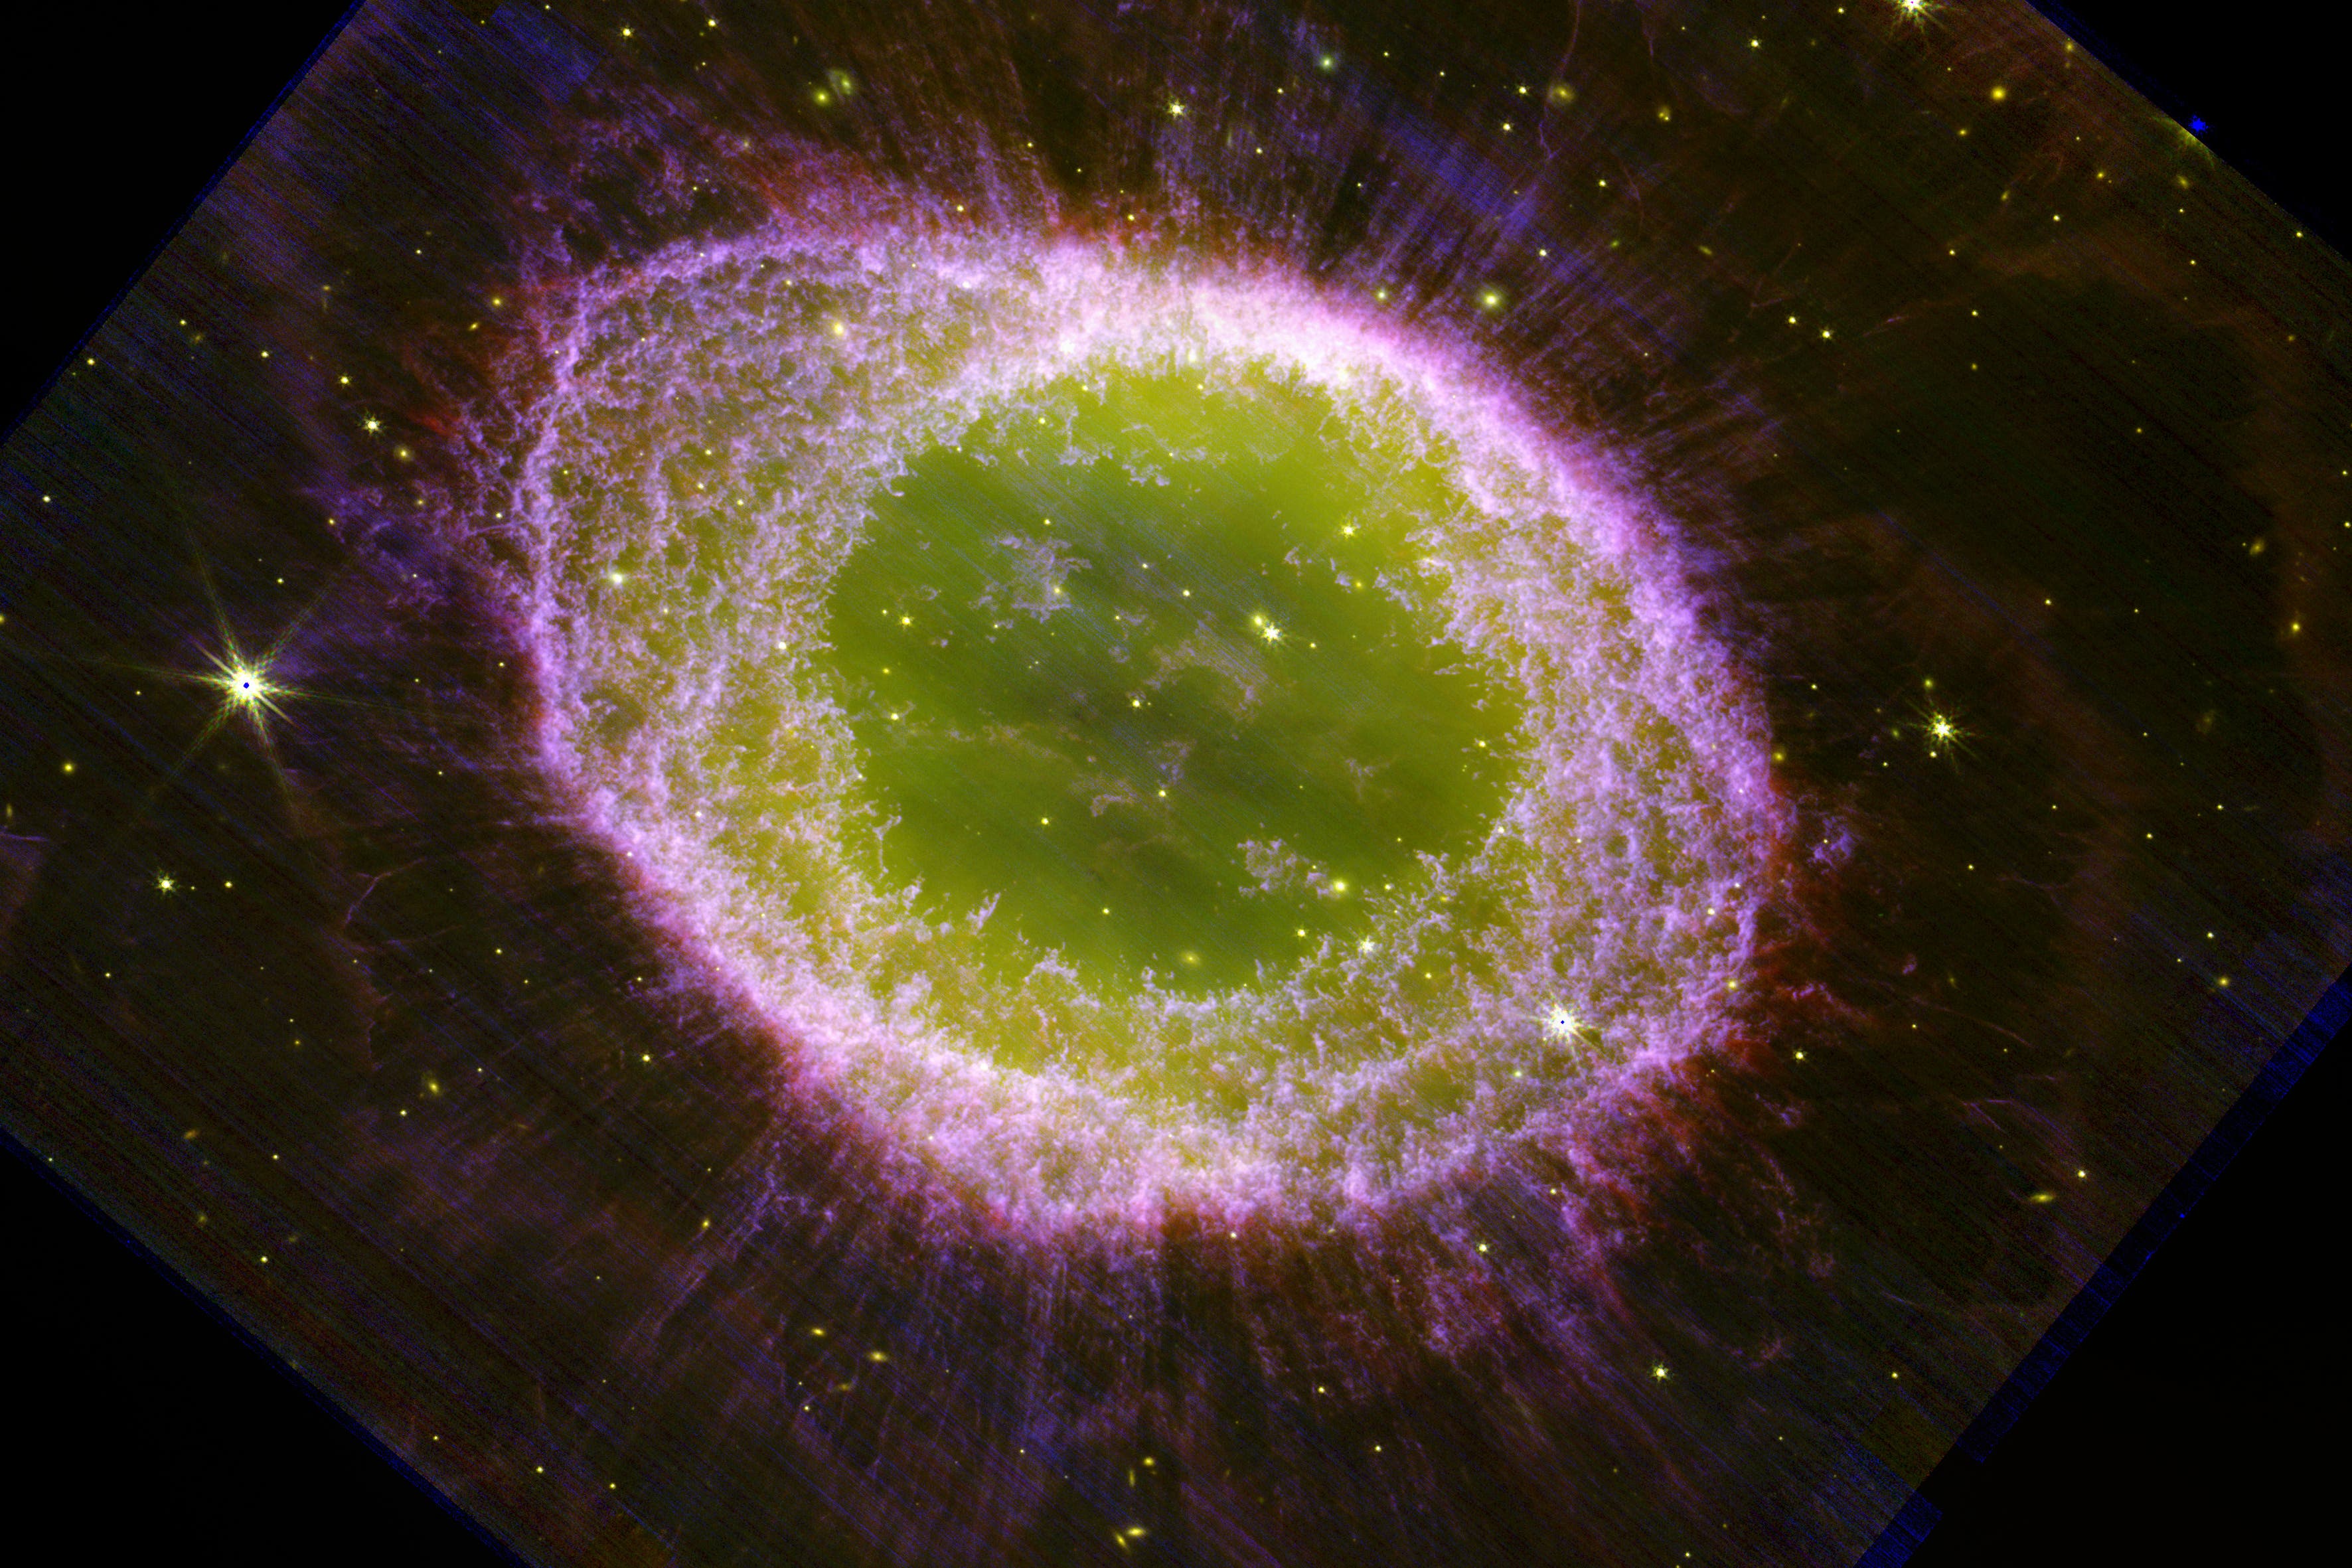 James Webb Space Telescope captures new images of the Ring Nebula | The ...